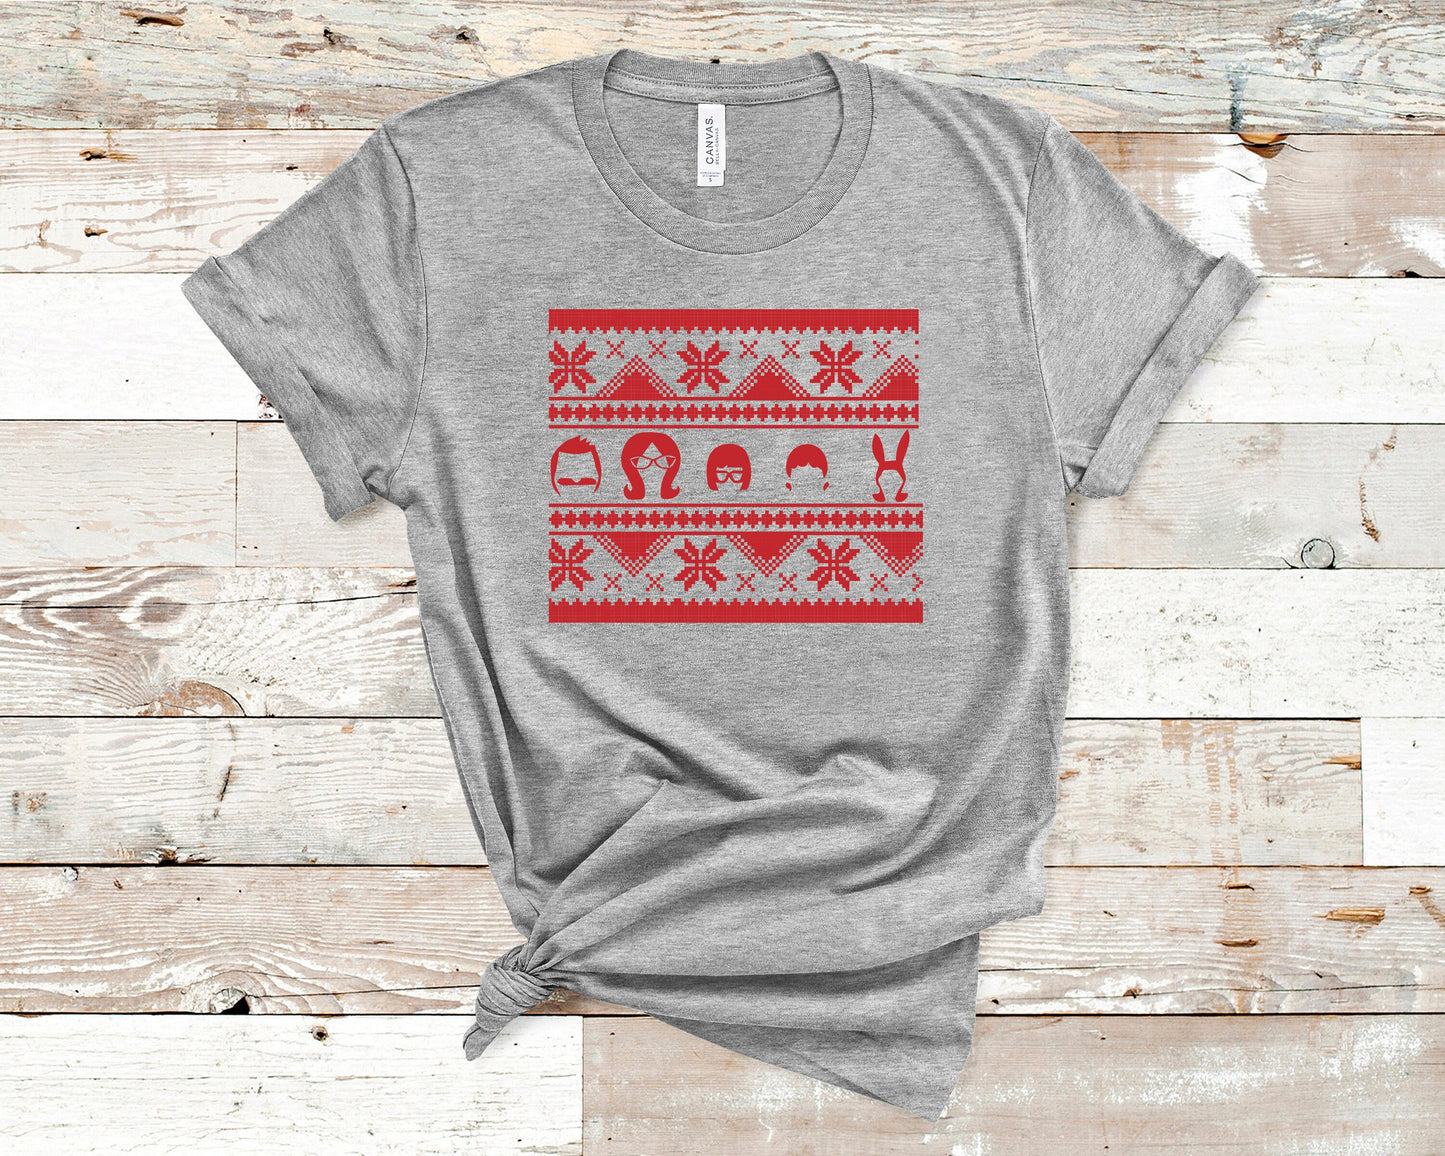 Bobs Burgers Ugly Tee - Ugly "Sweater" Design - Funny Christmas Gift